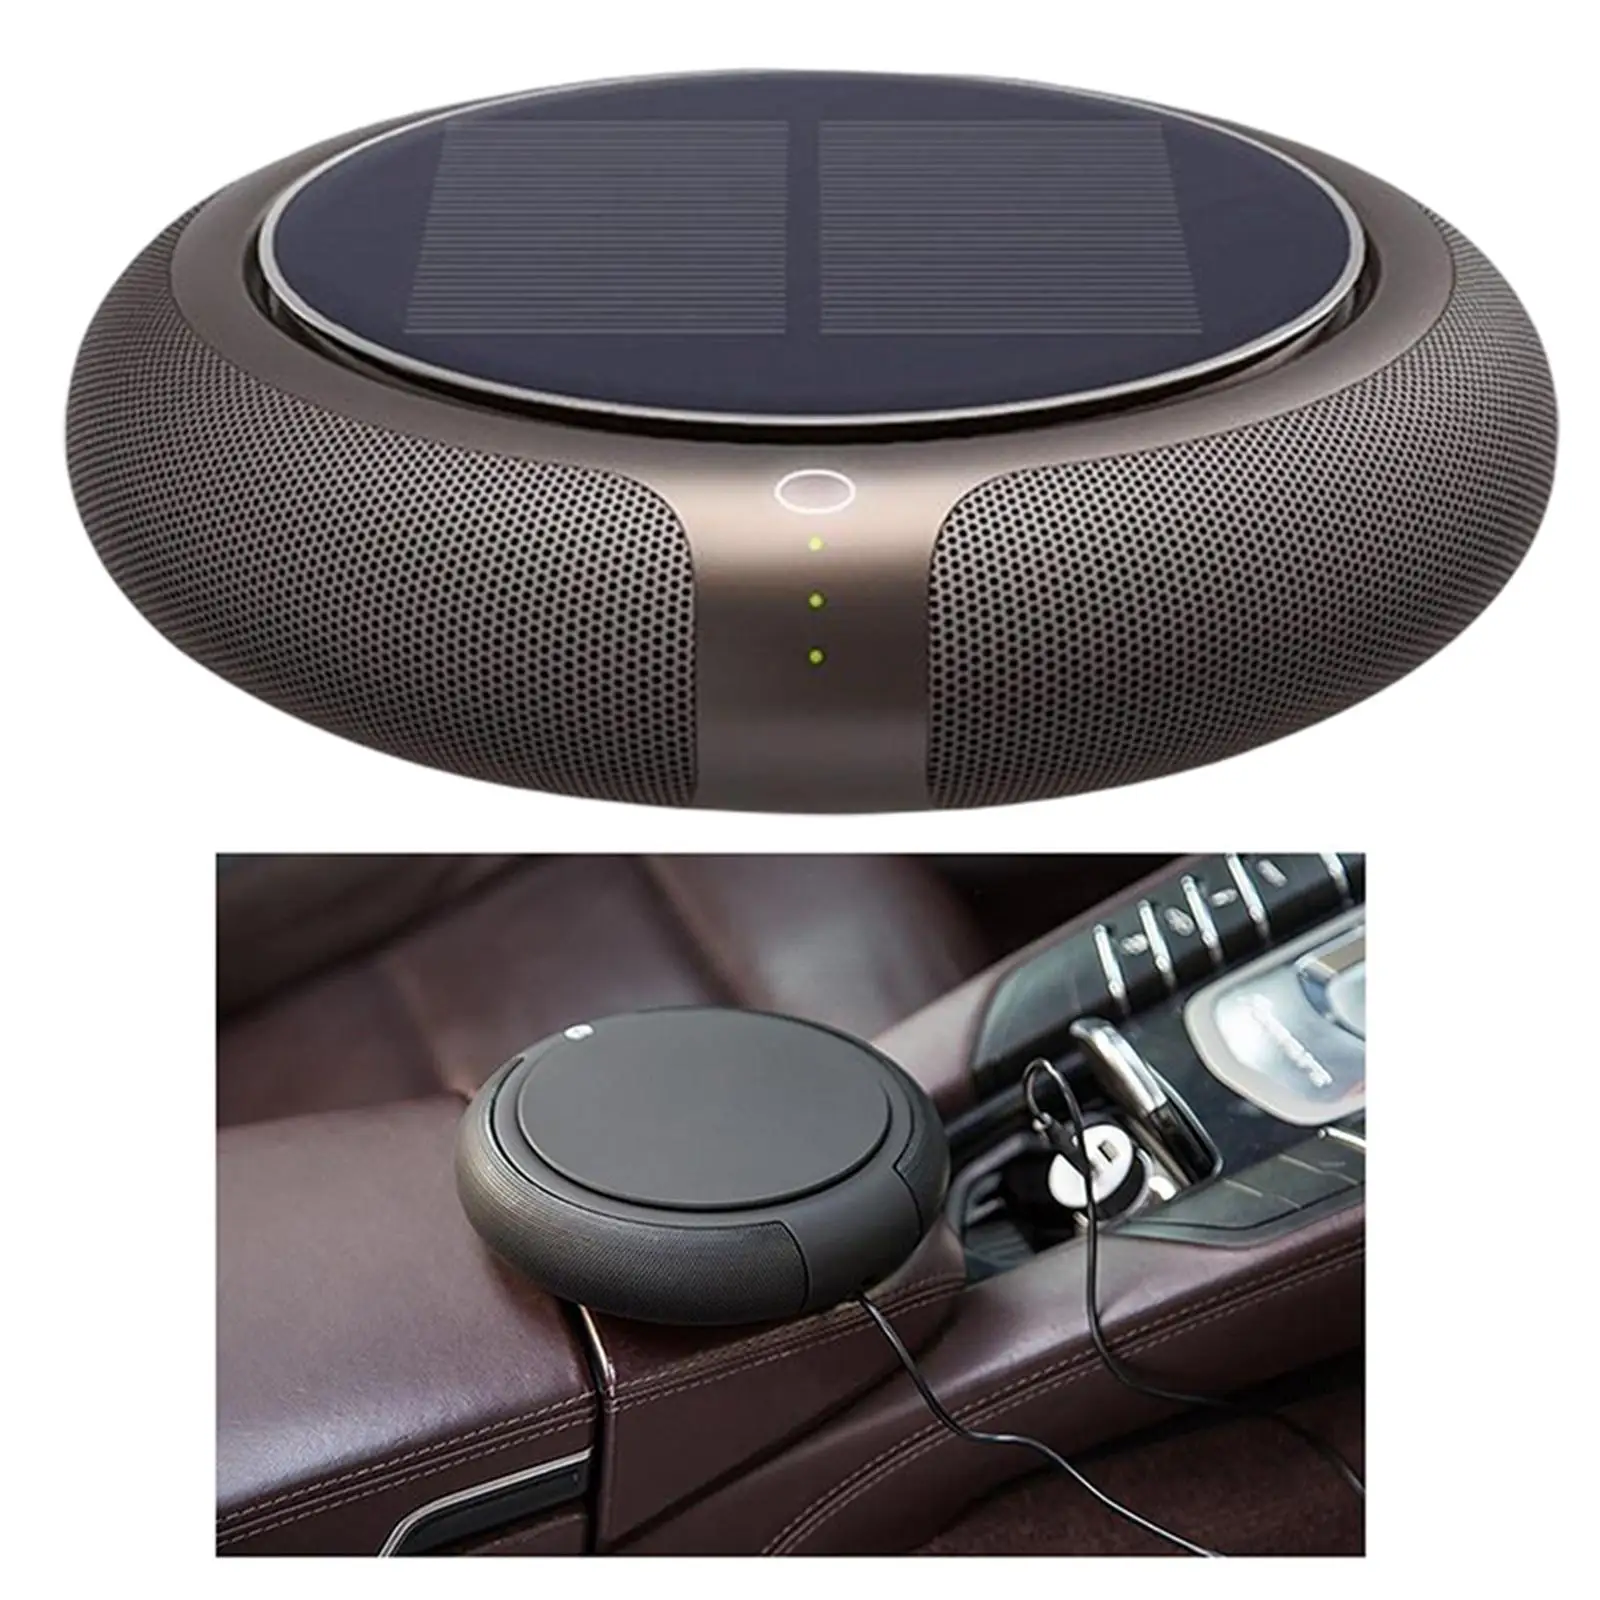 Car Air Purifier Portable Air Cleaner Fits for Vehicle Wardrobe Pet Home